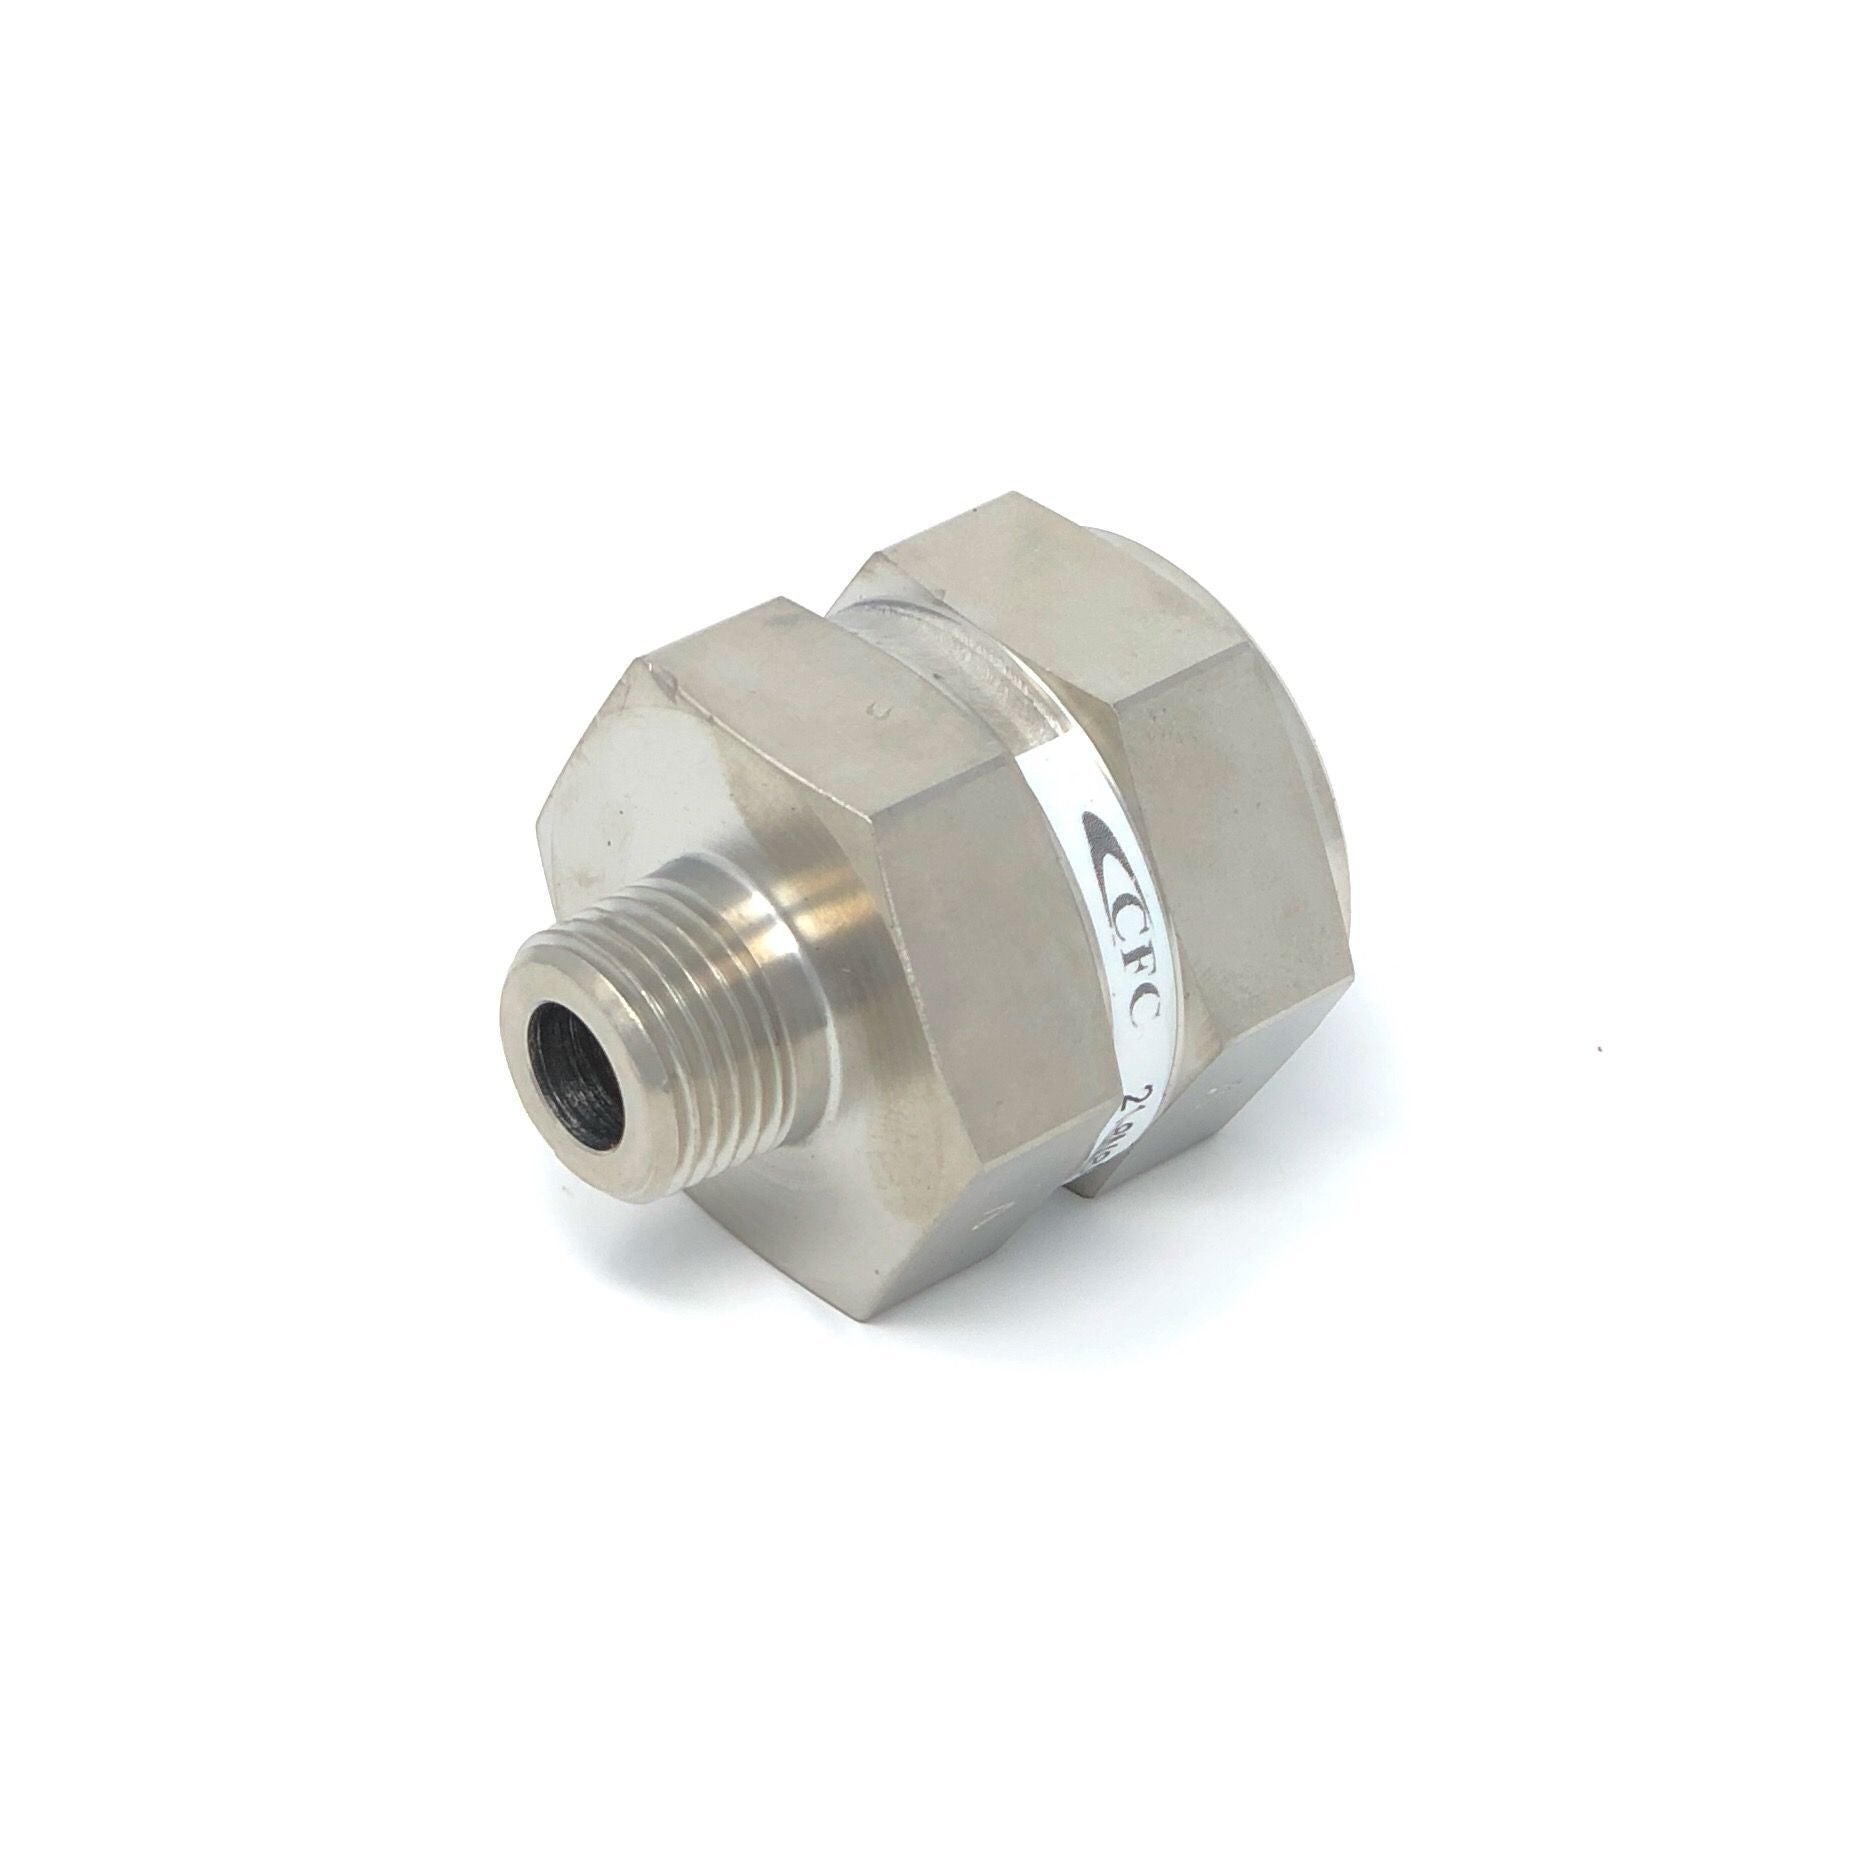 21-4S4S-10S : Chase High Pressure Inline Filter, 6000psi, #4 SAE (1/4"), 10 Micron, No Visual Indicator, No Bypass